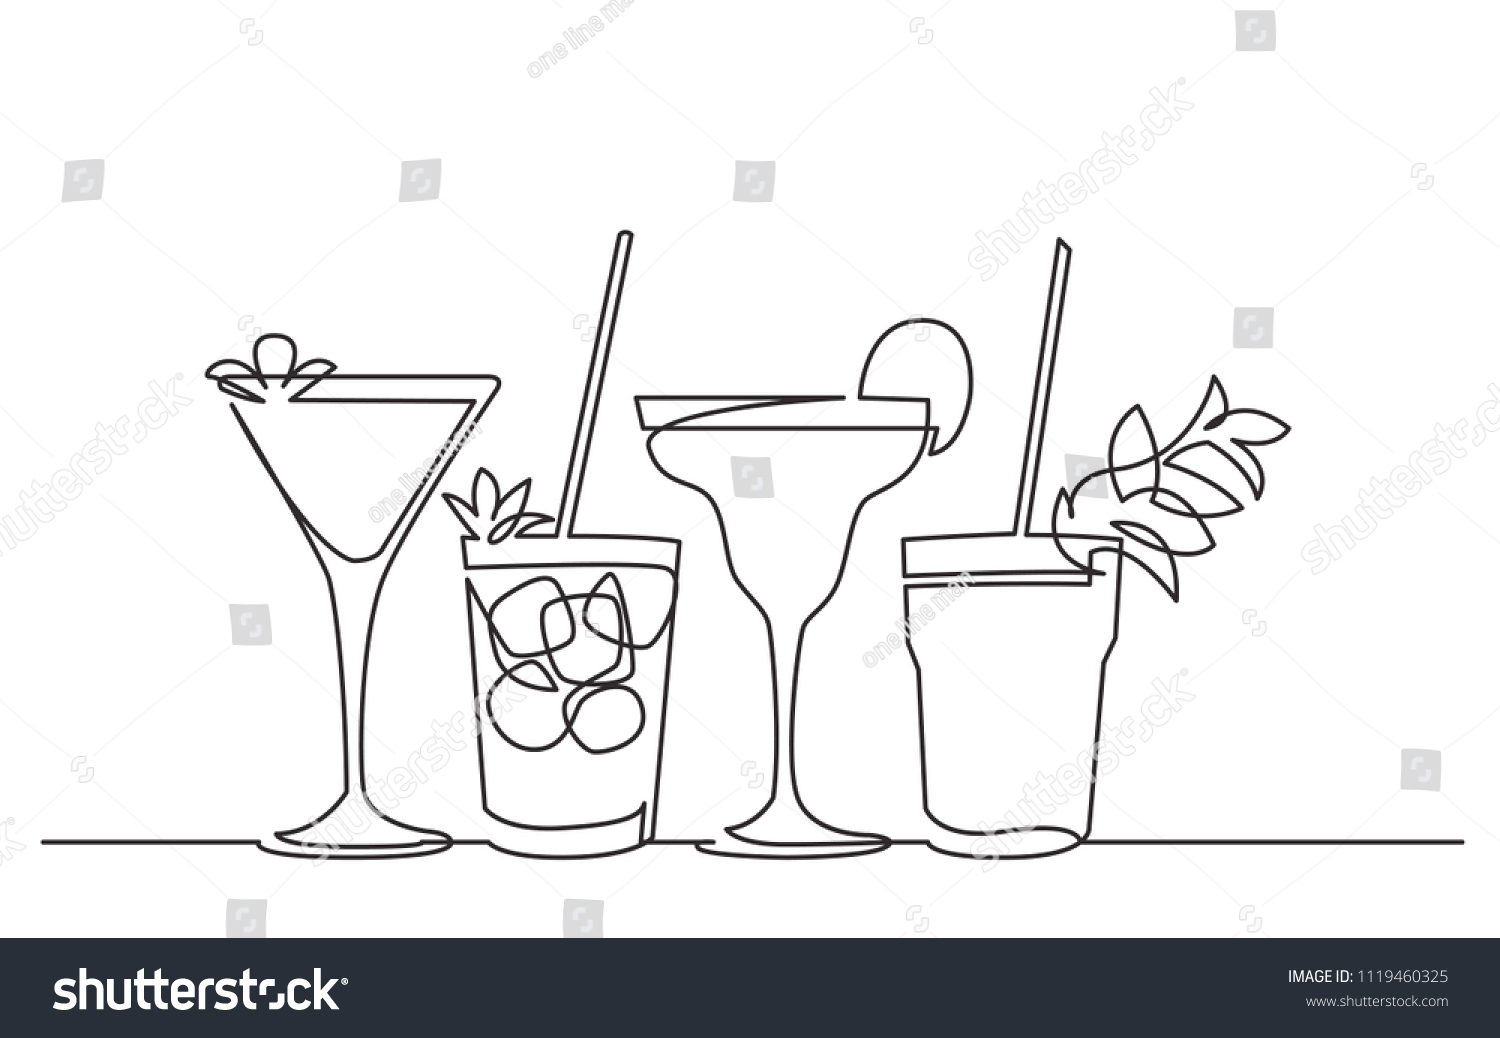 Drink one line drawing